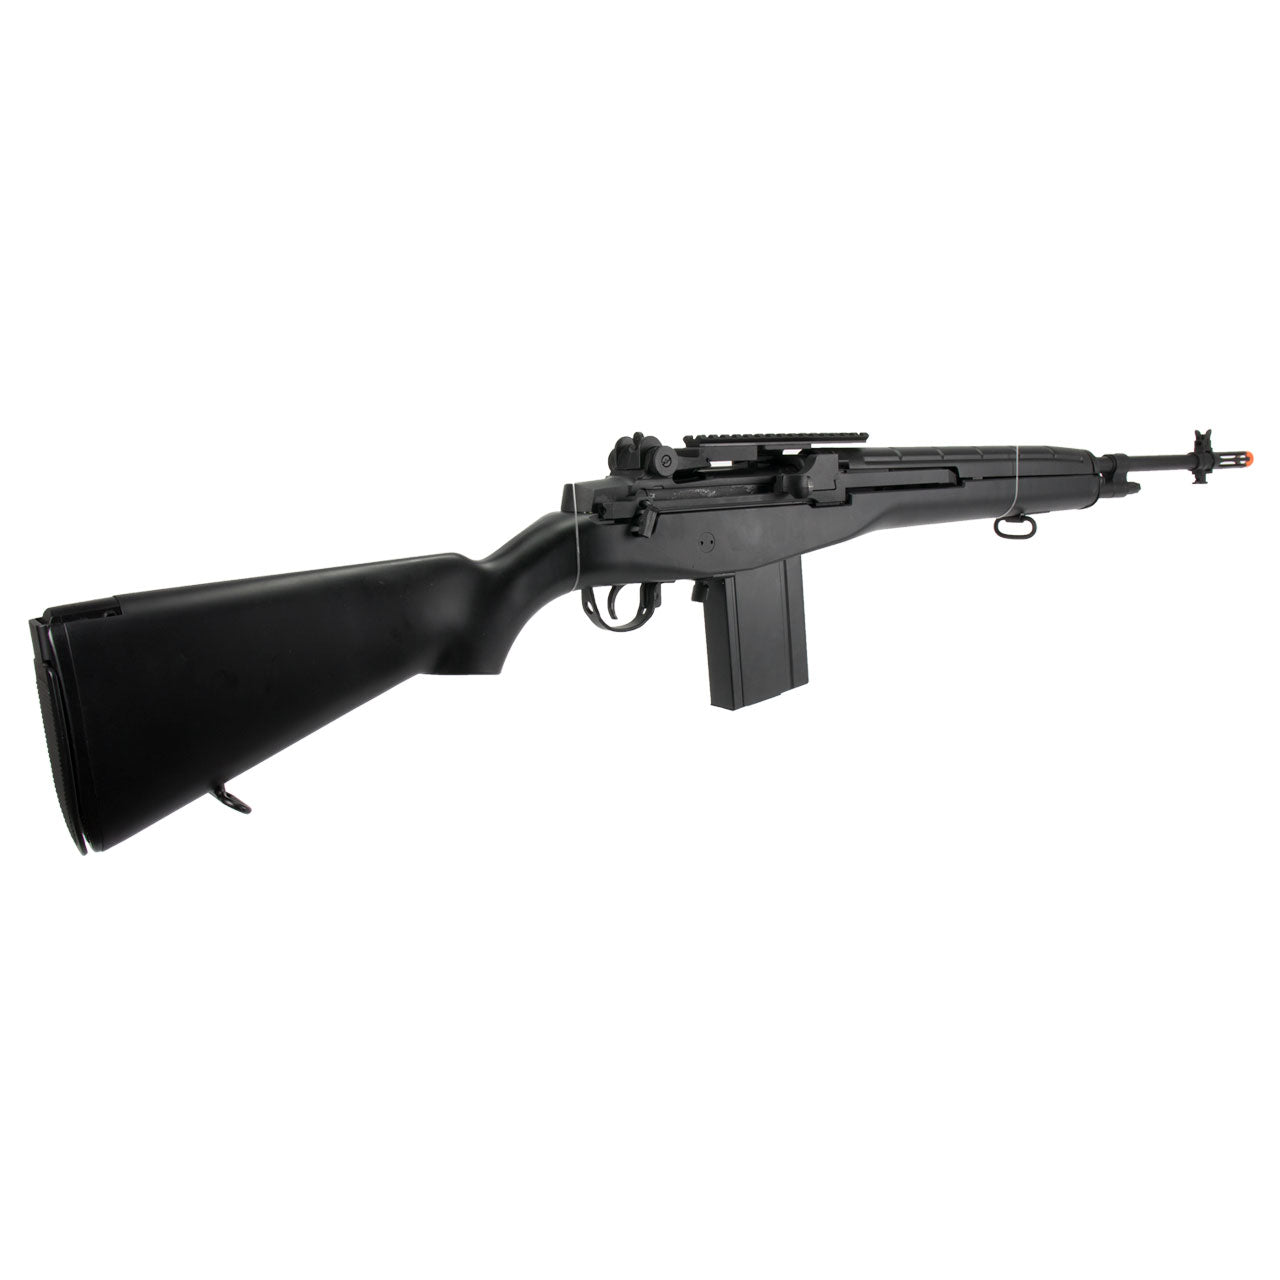 AGM MP008 M14 Full Size Airsoft AEG Sniper Rifle w/ Battery & Charger